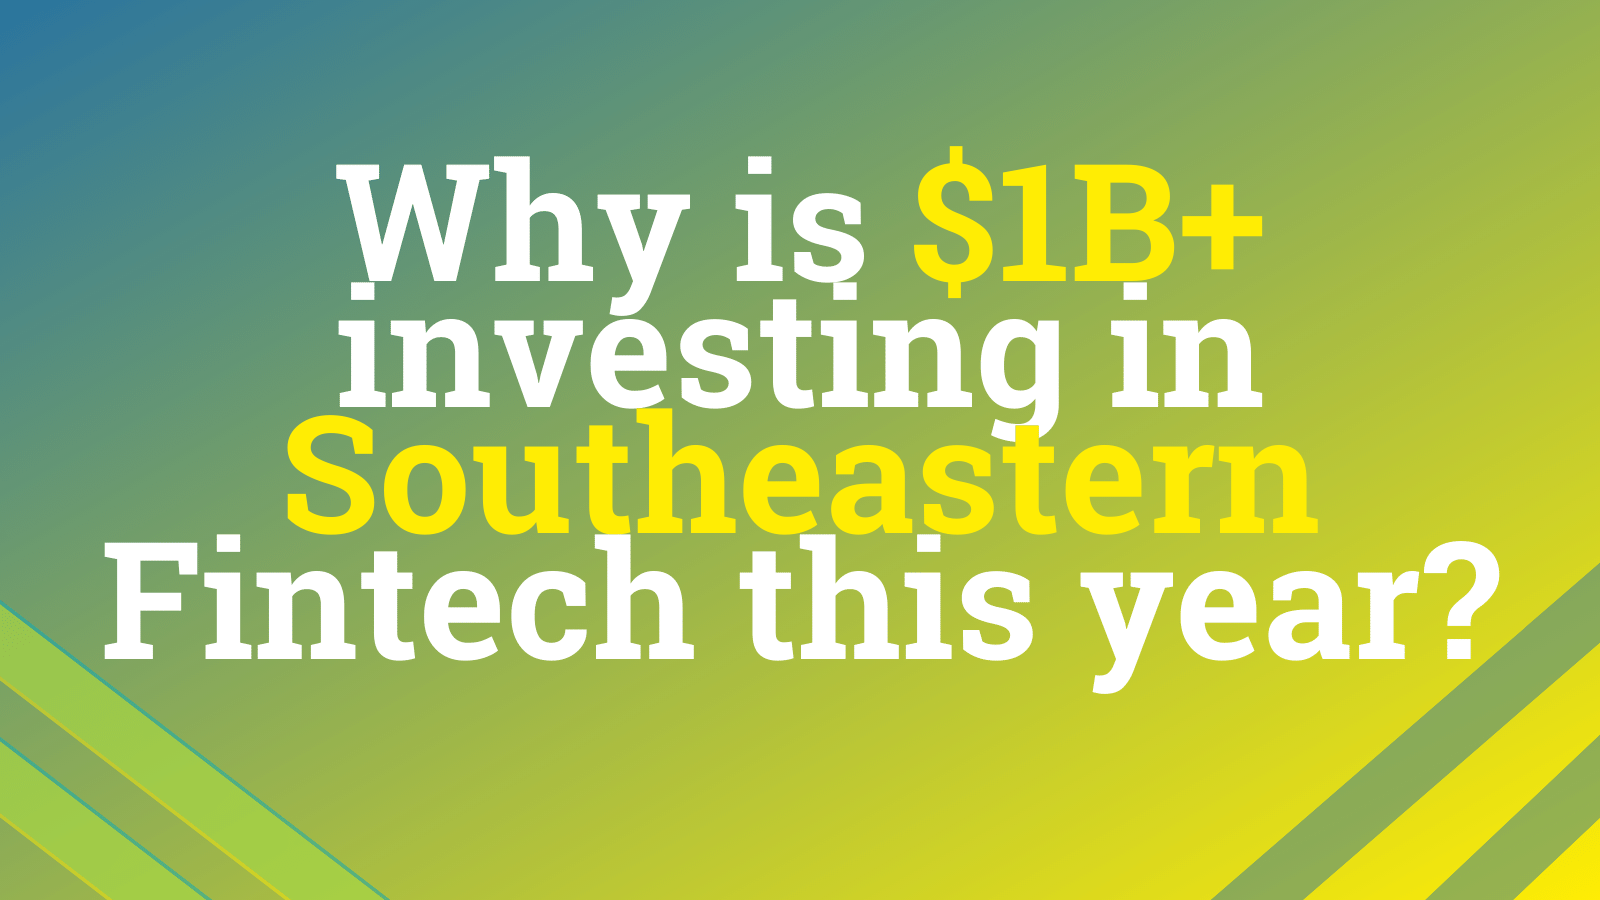 Fintech Startup Trends: Look For $1B+ In Southeast Fintech Venture Capital This Year